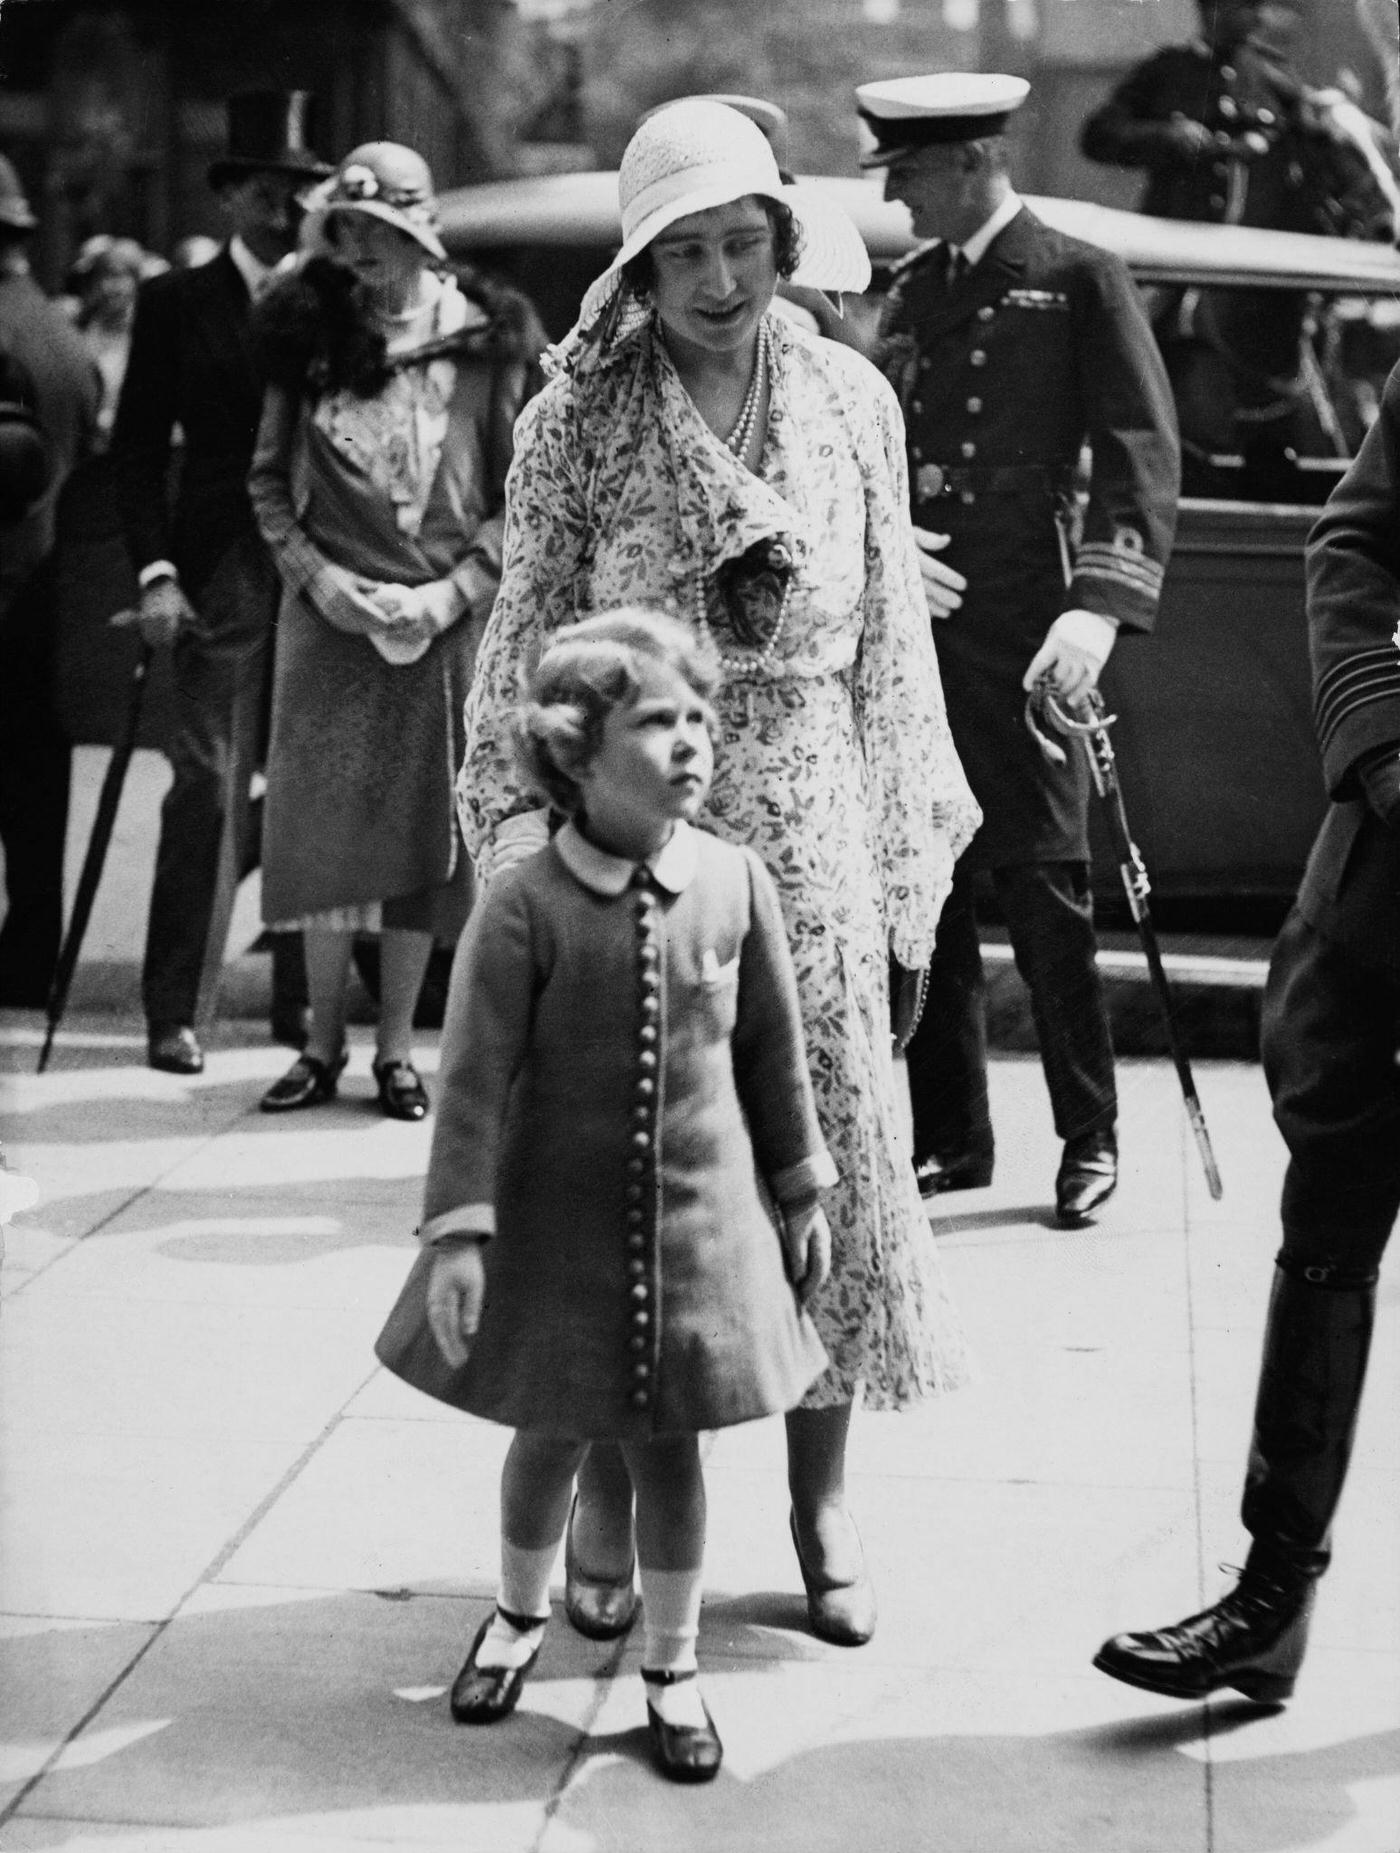 Princess Elizabeth and her mother Queen Elizabeth arrive at Olympia to attend the Royal Tournament in London in June 1931.